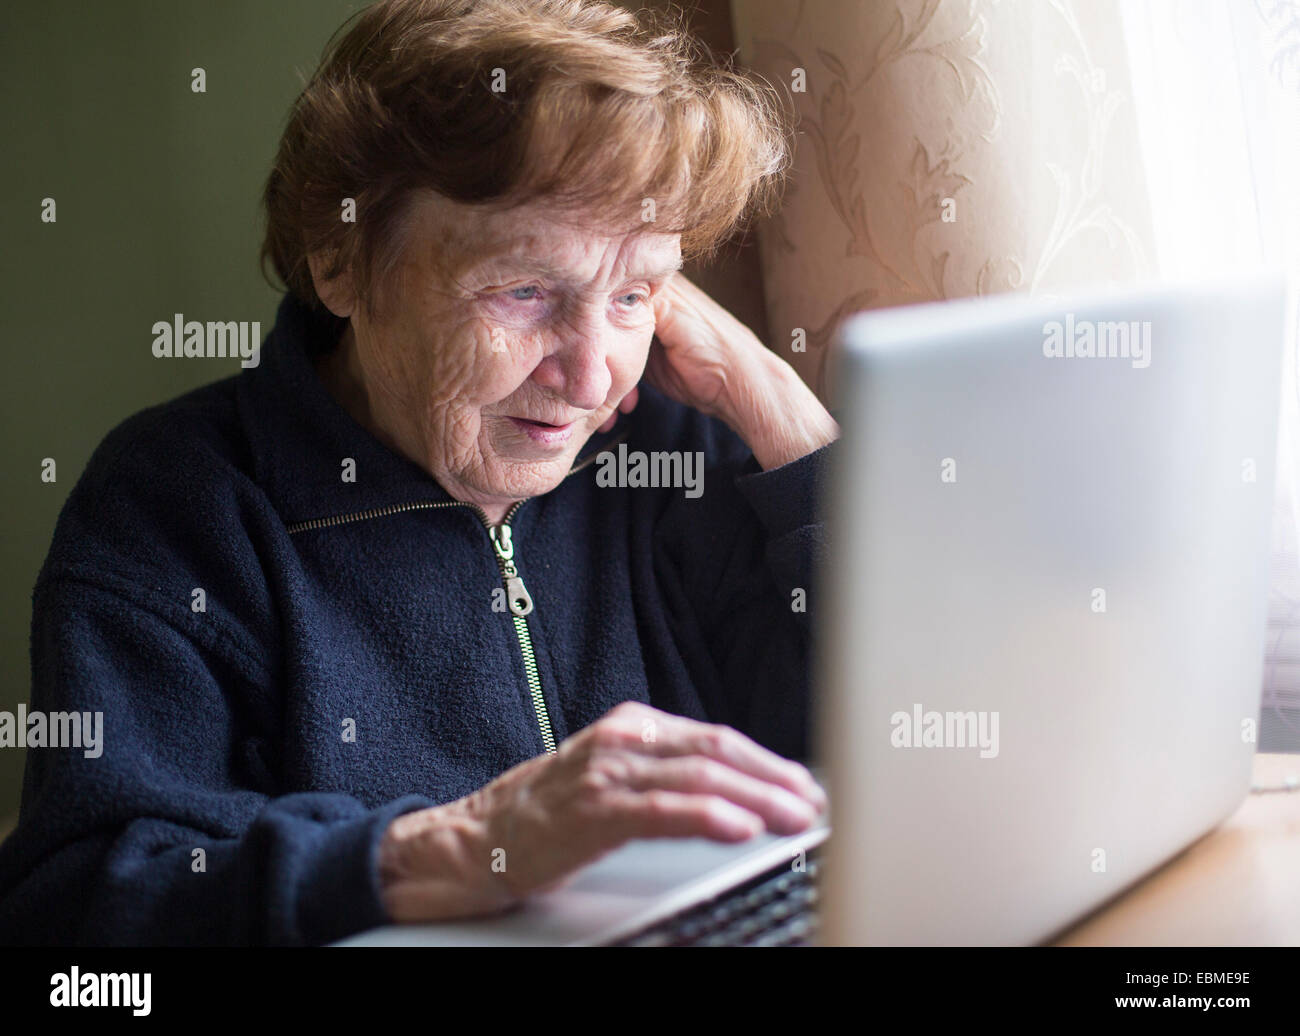 Mature woman working on a laptop. Stock Photo